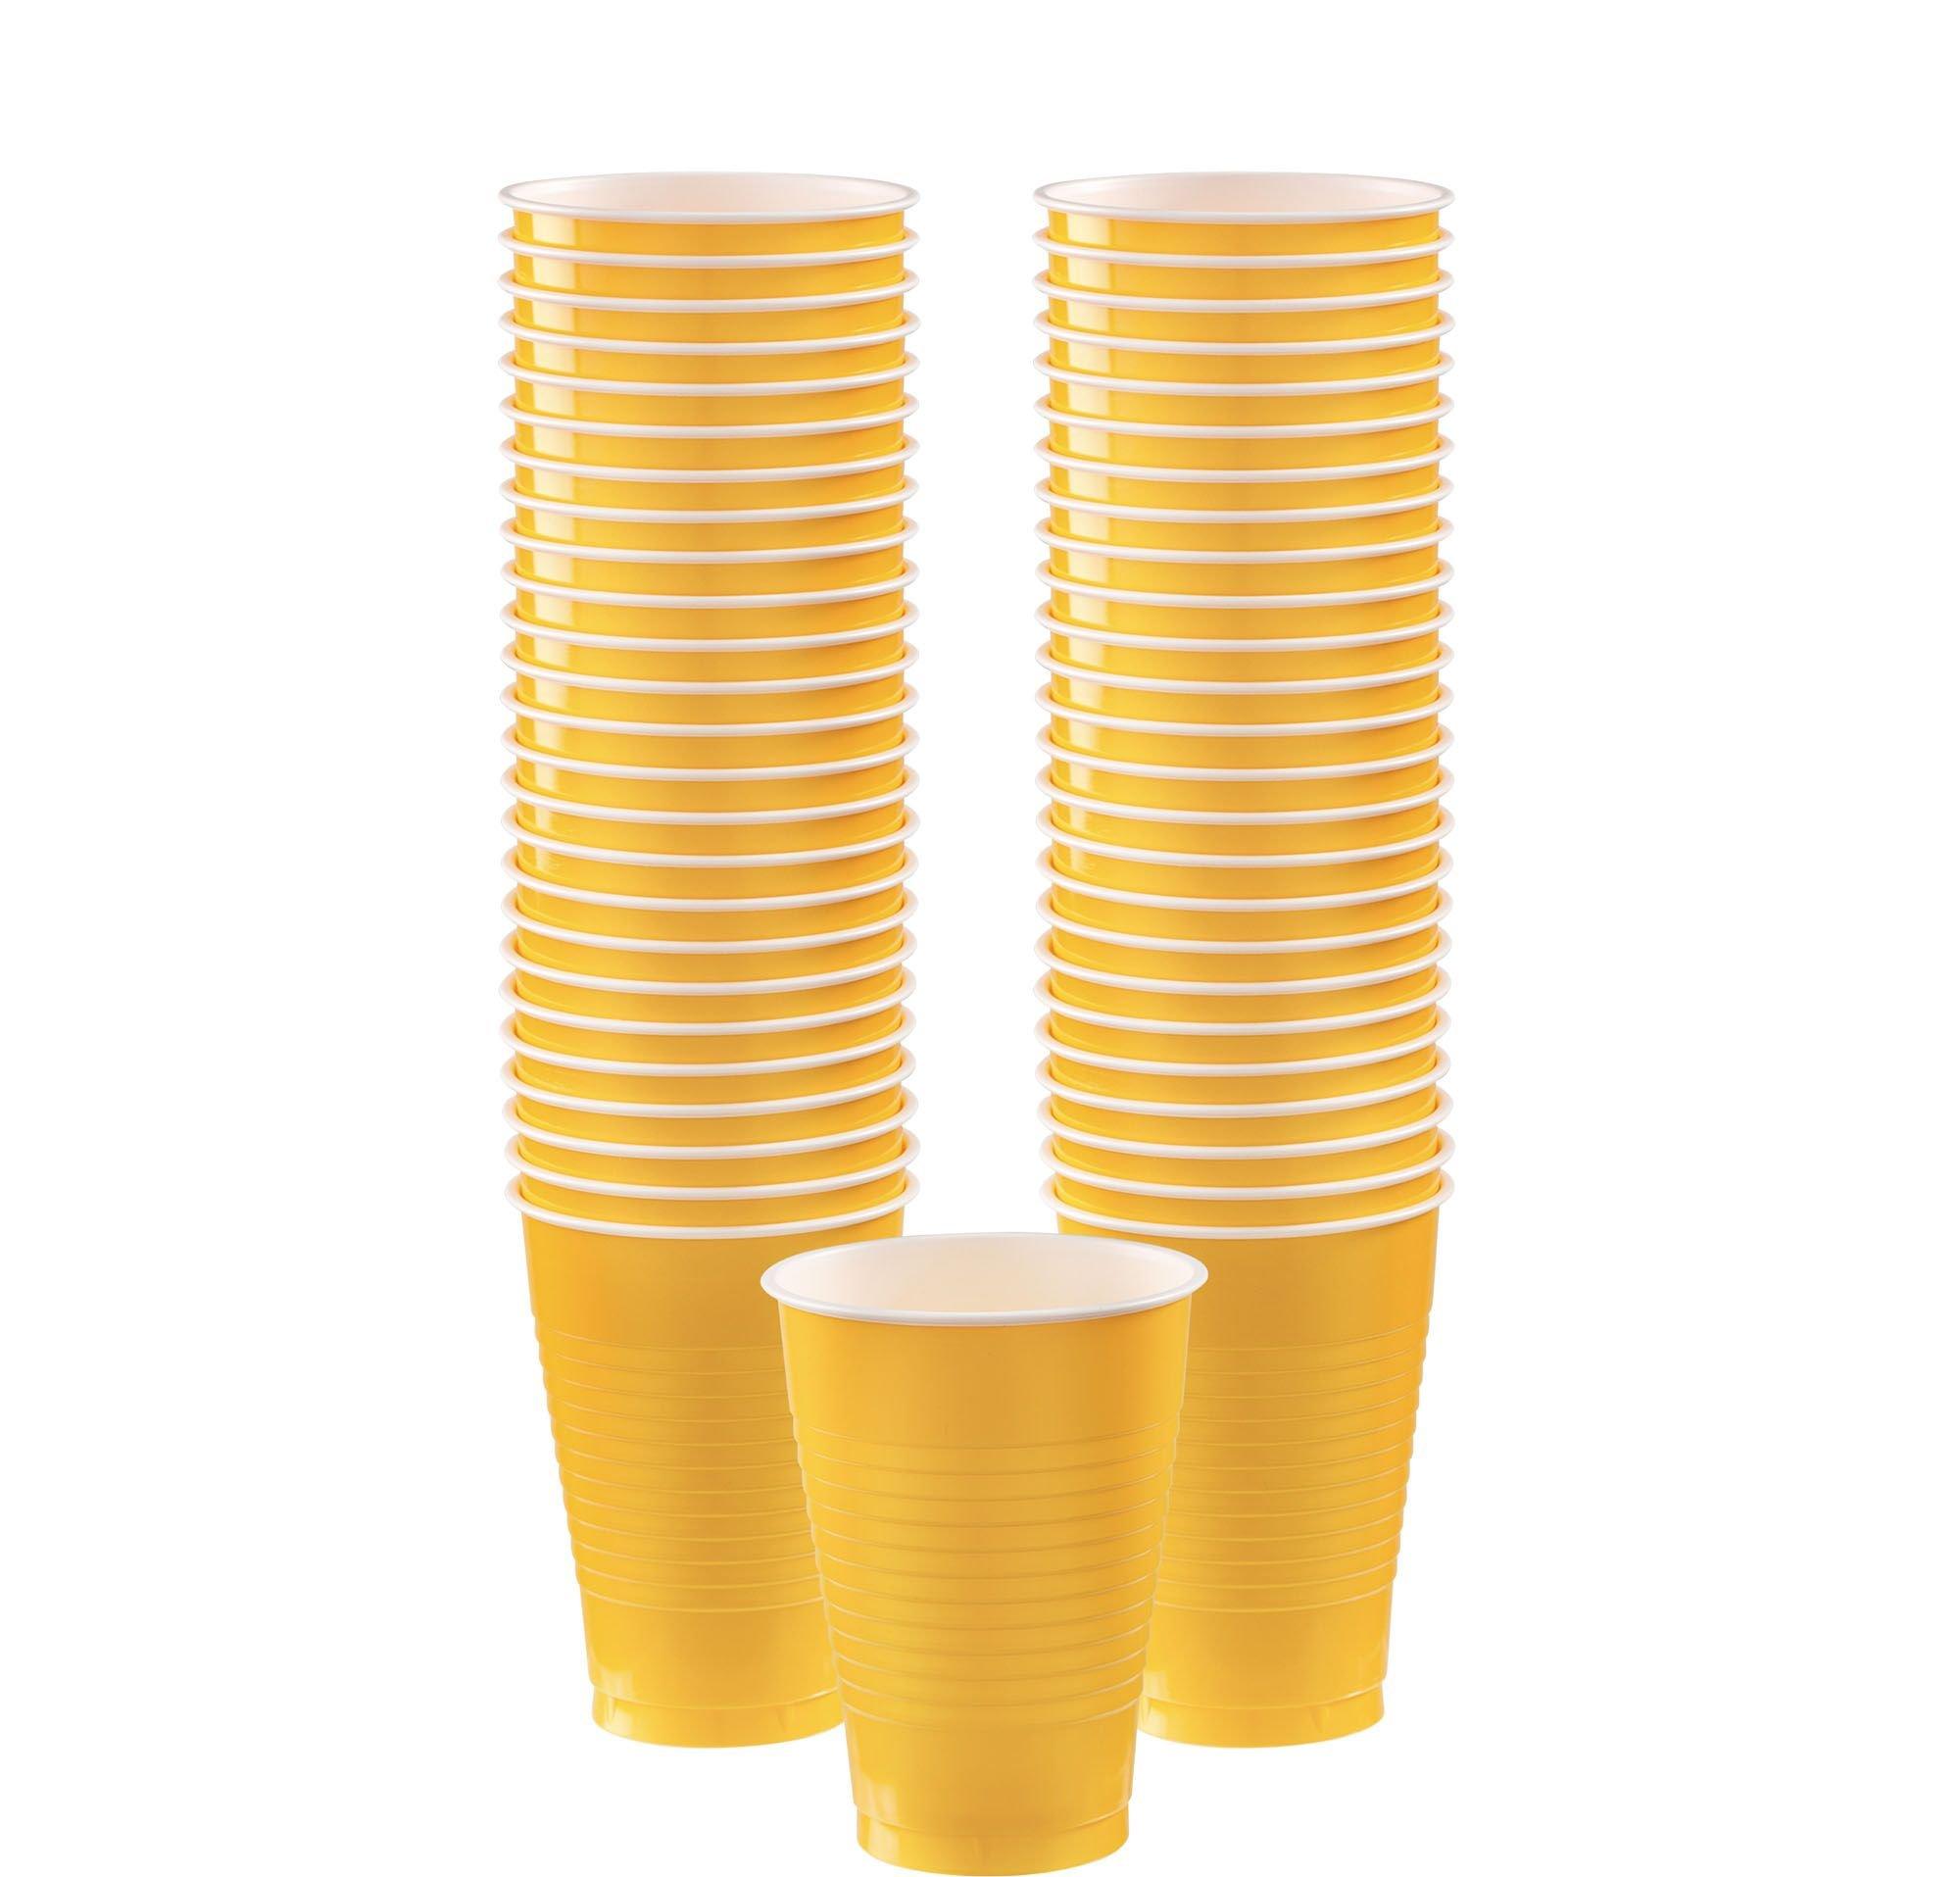 Hot Party Paper Cups, 8 Ounce, 50 Count, Multiple Colors (Yellow)